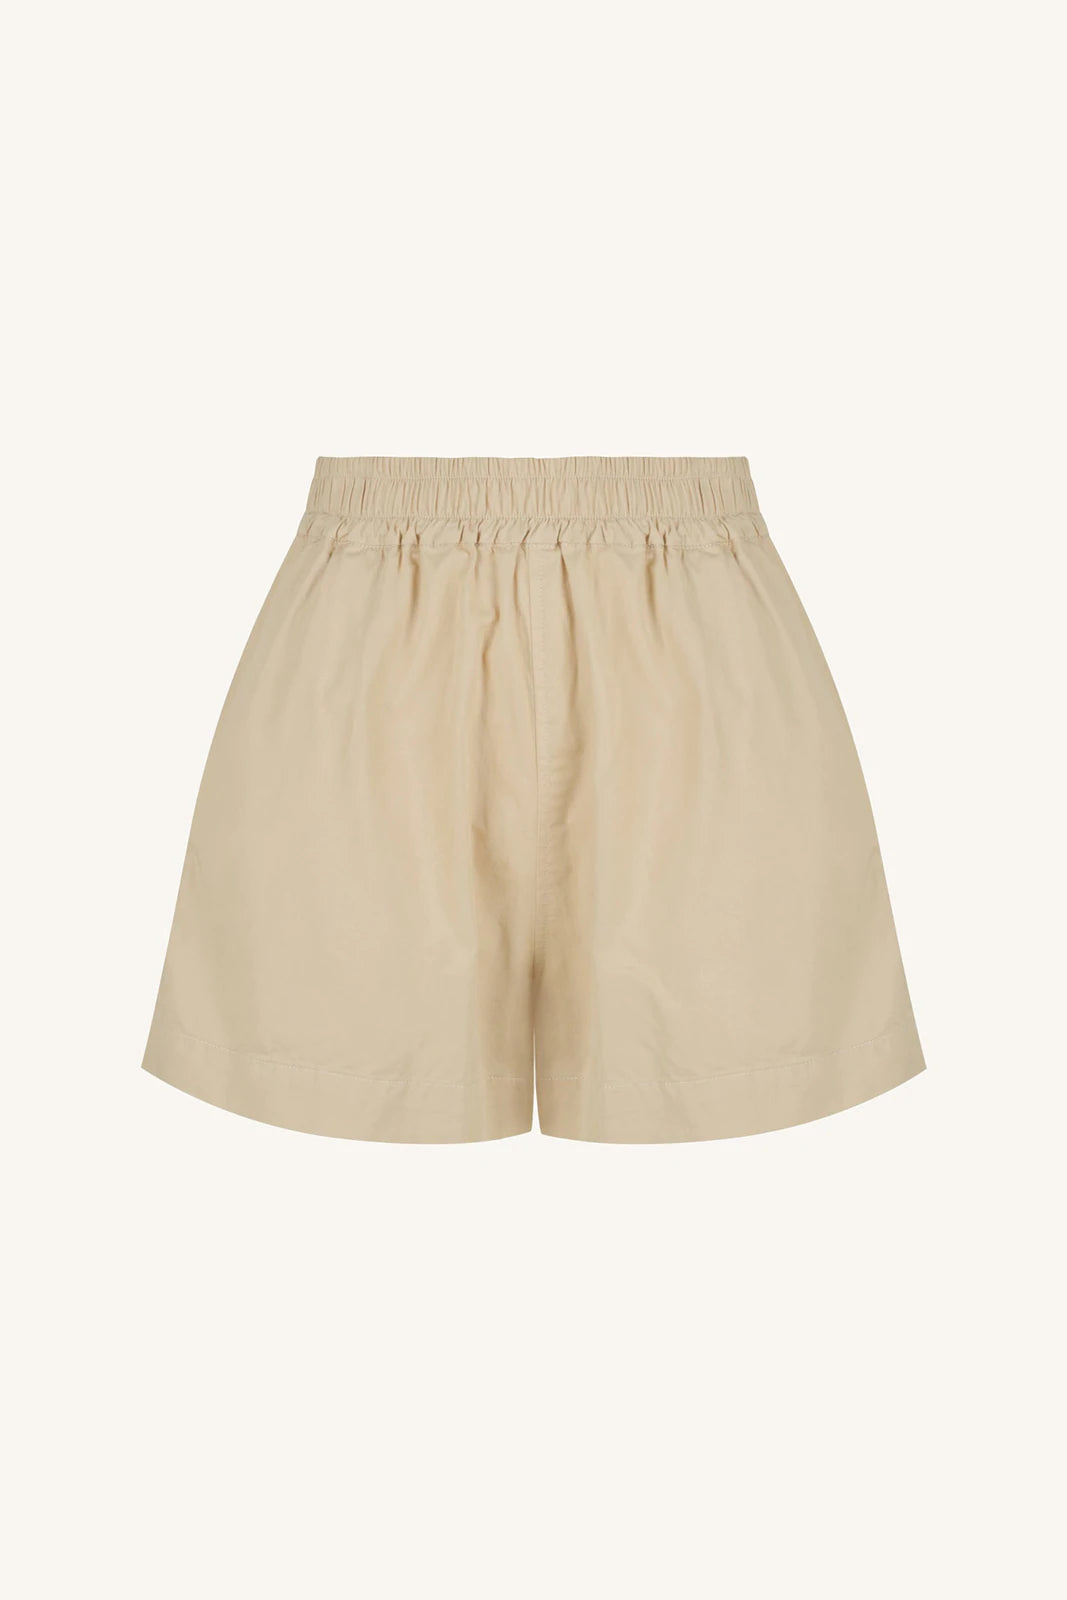 Rowie the Label - Phillip Organic Shorts, Fawn - Worn For Good